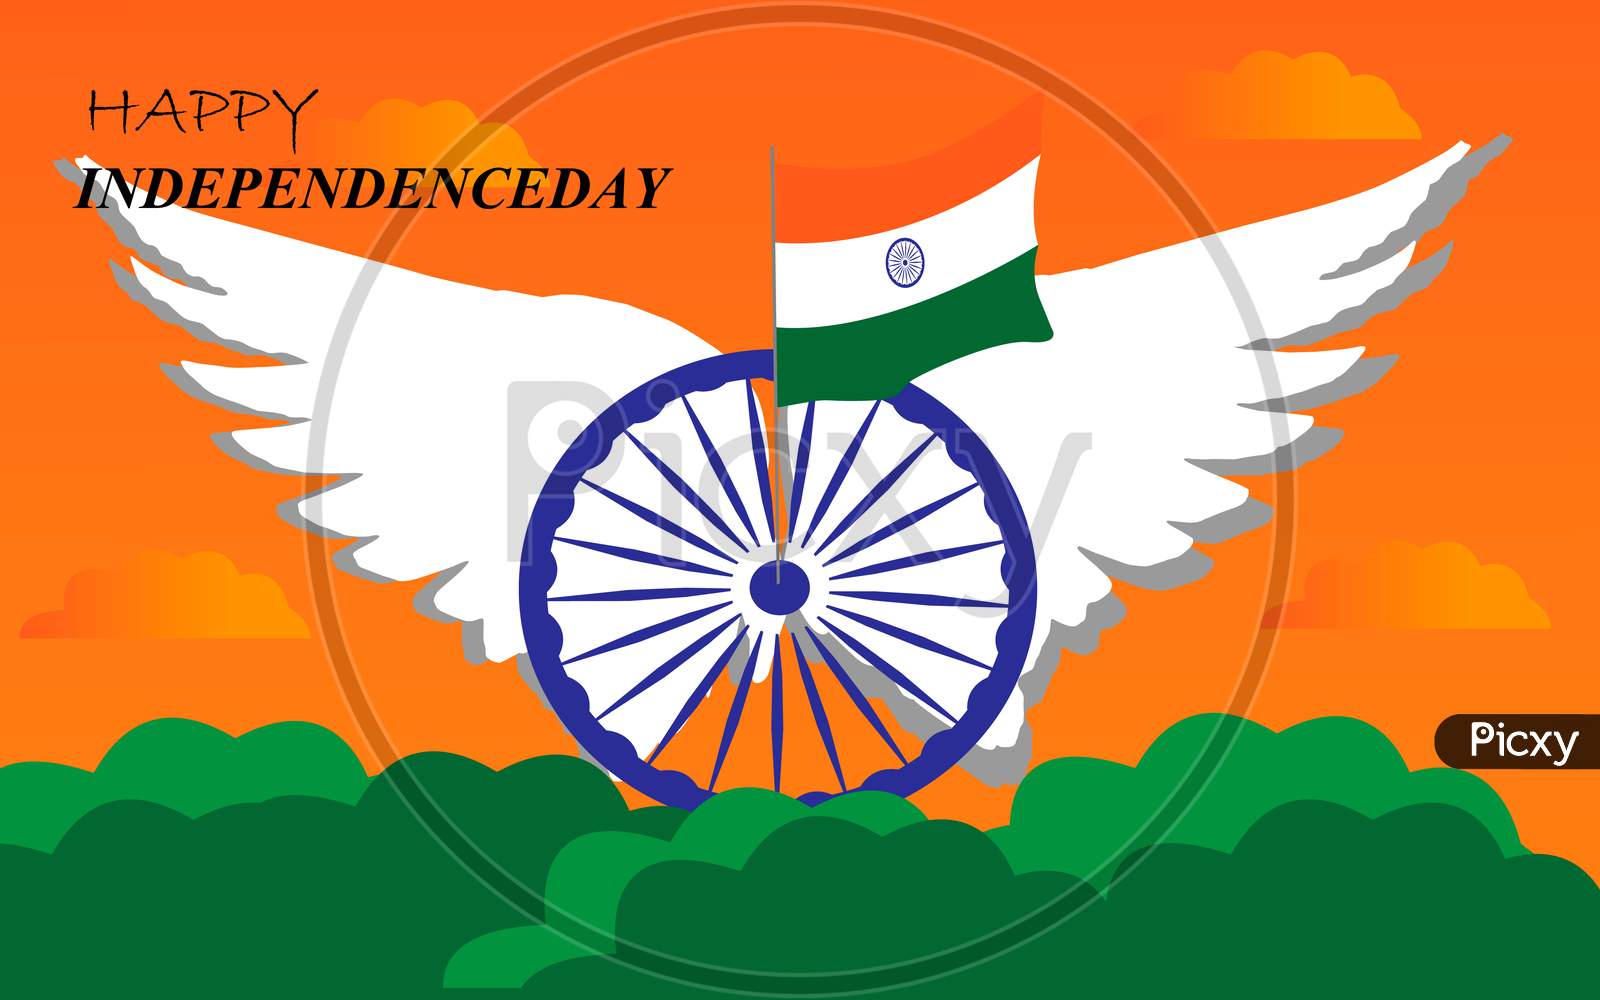 Independence day. vector illustration of 15th August india Happy Independence day poster.